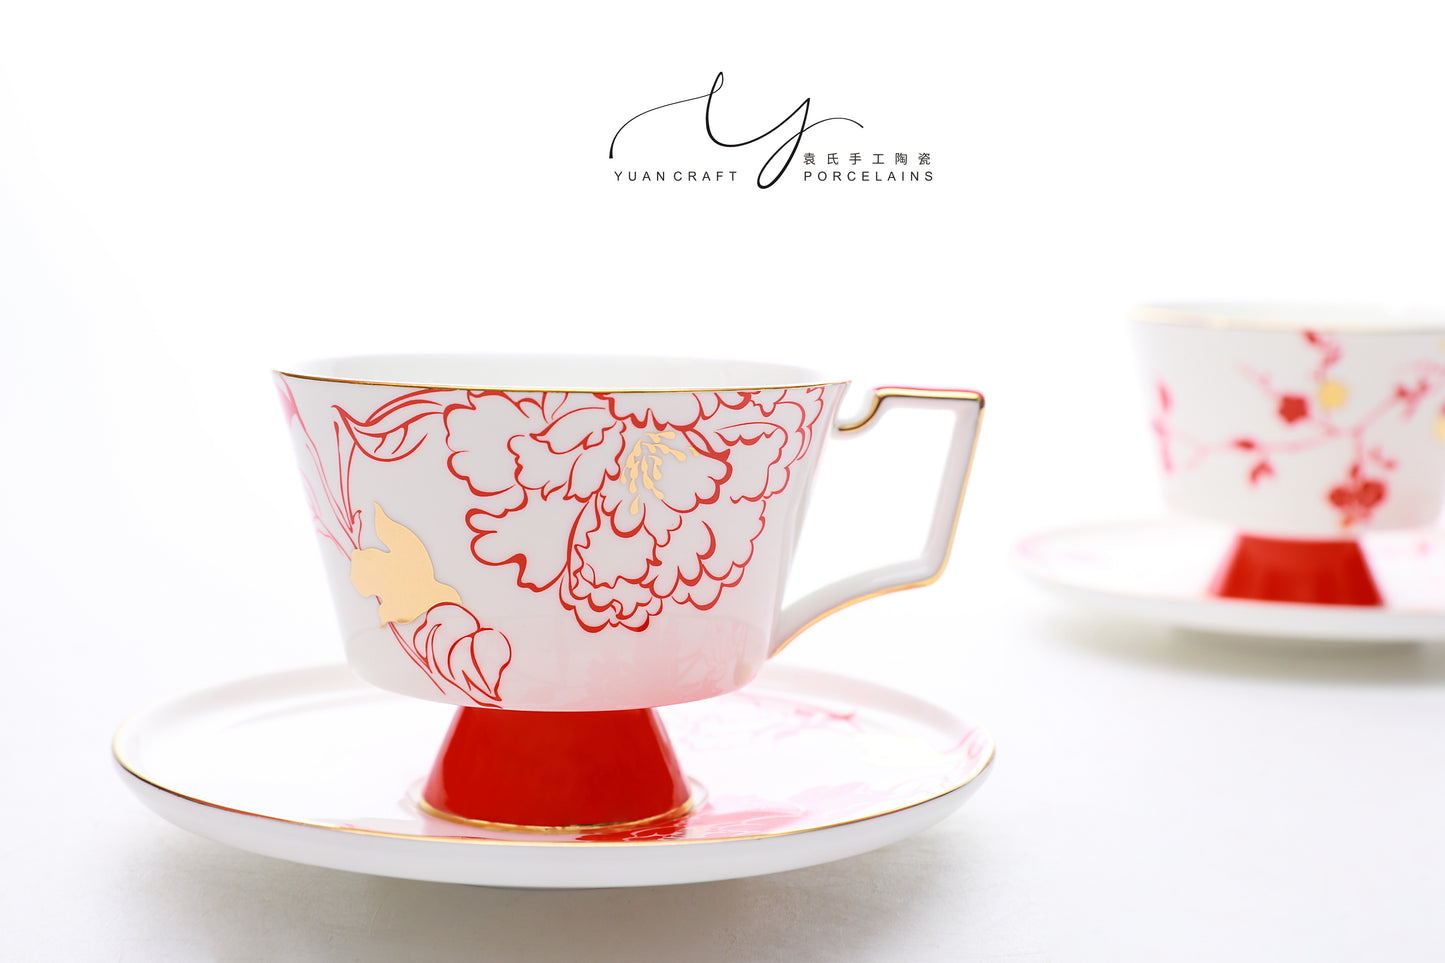 Peony and Plum Blossoms Teacups & Saucers Sets for Two